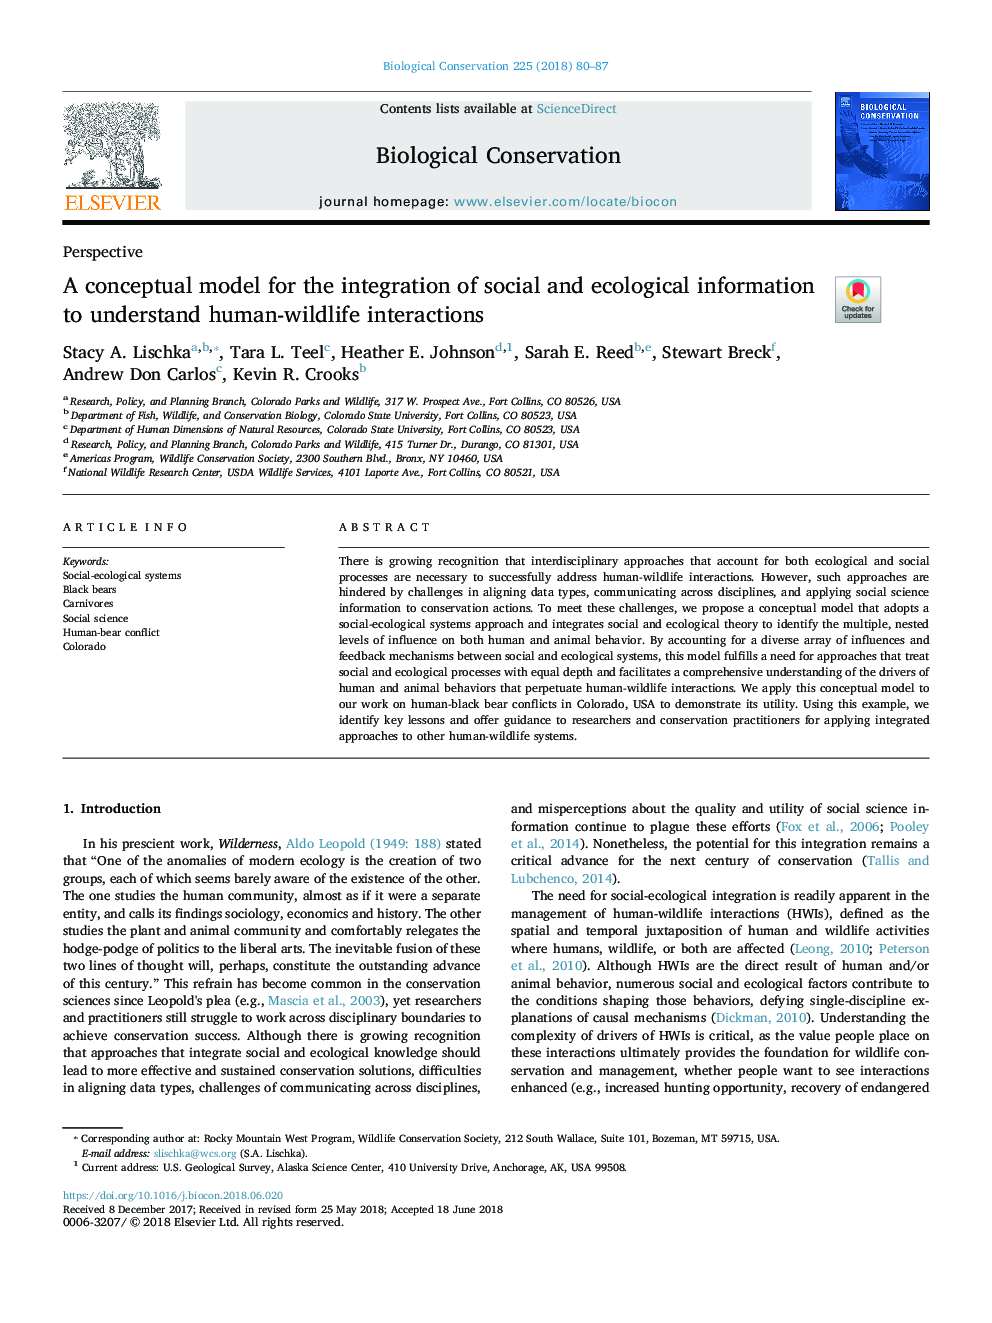 A conceptual model for the integration of social and ecological information to understand human-wildlife interactions